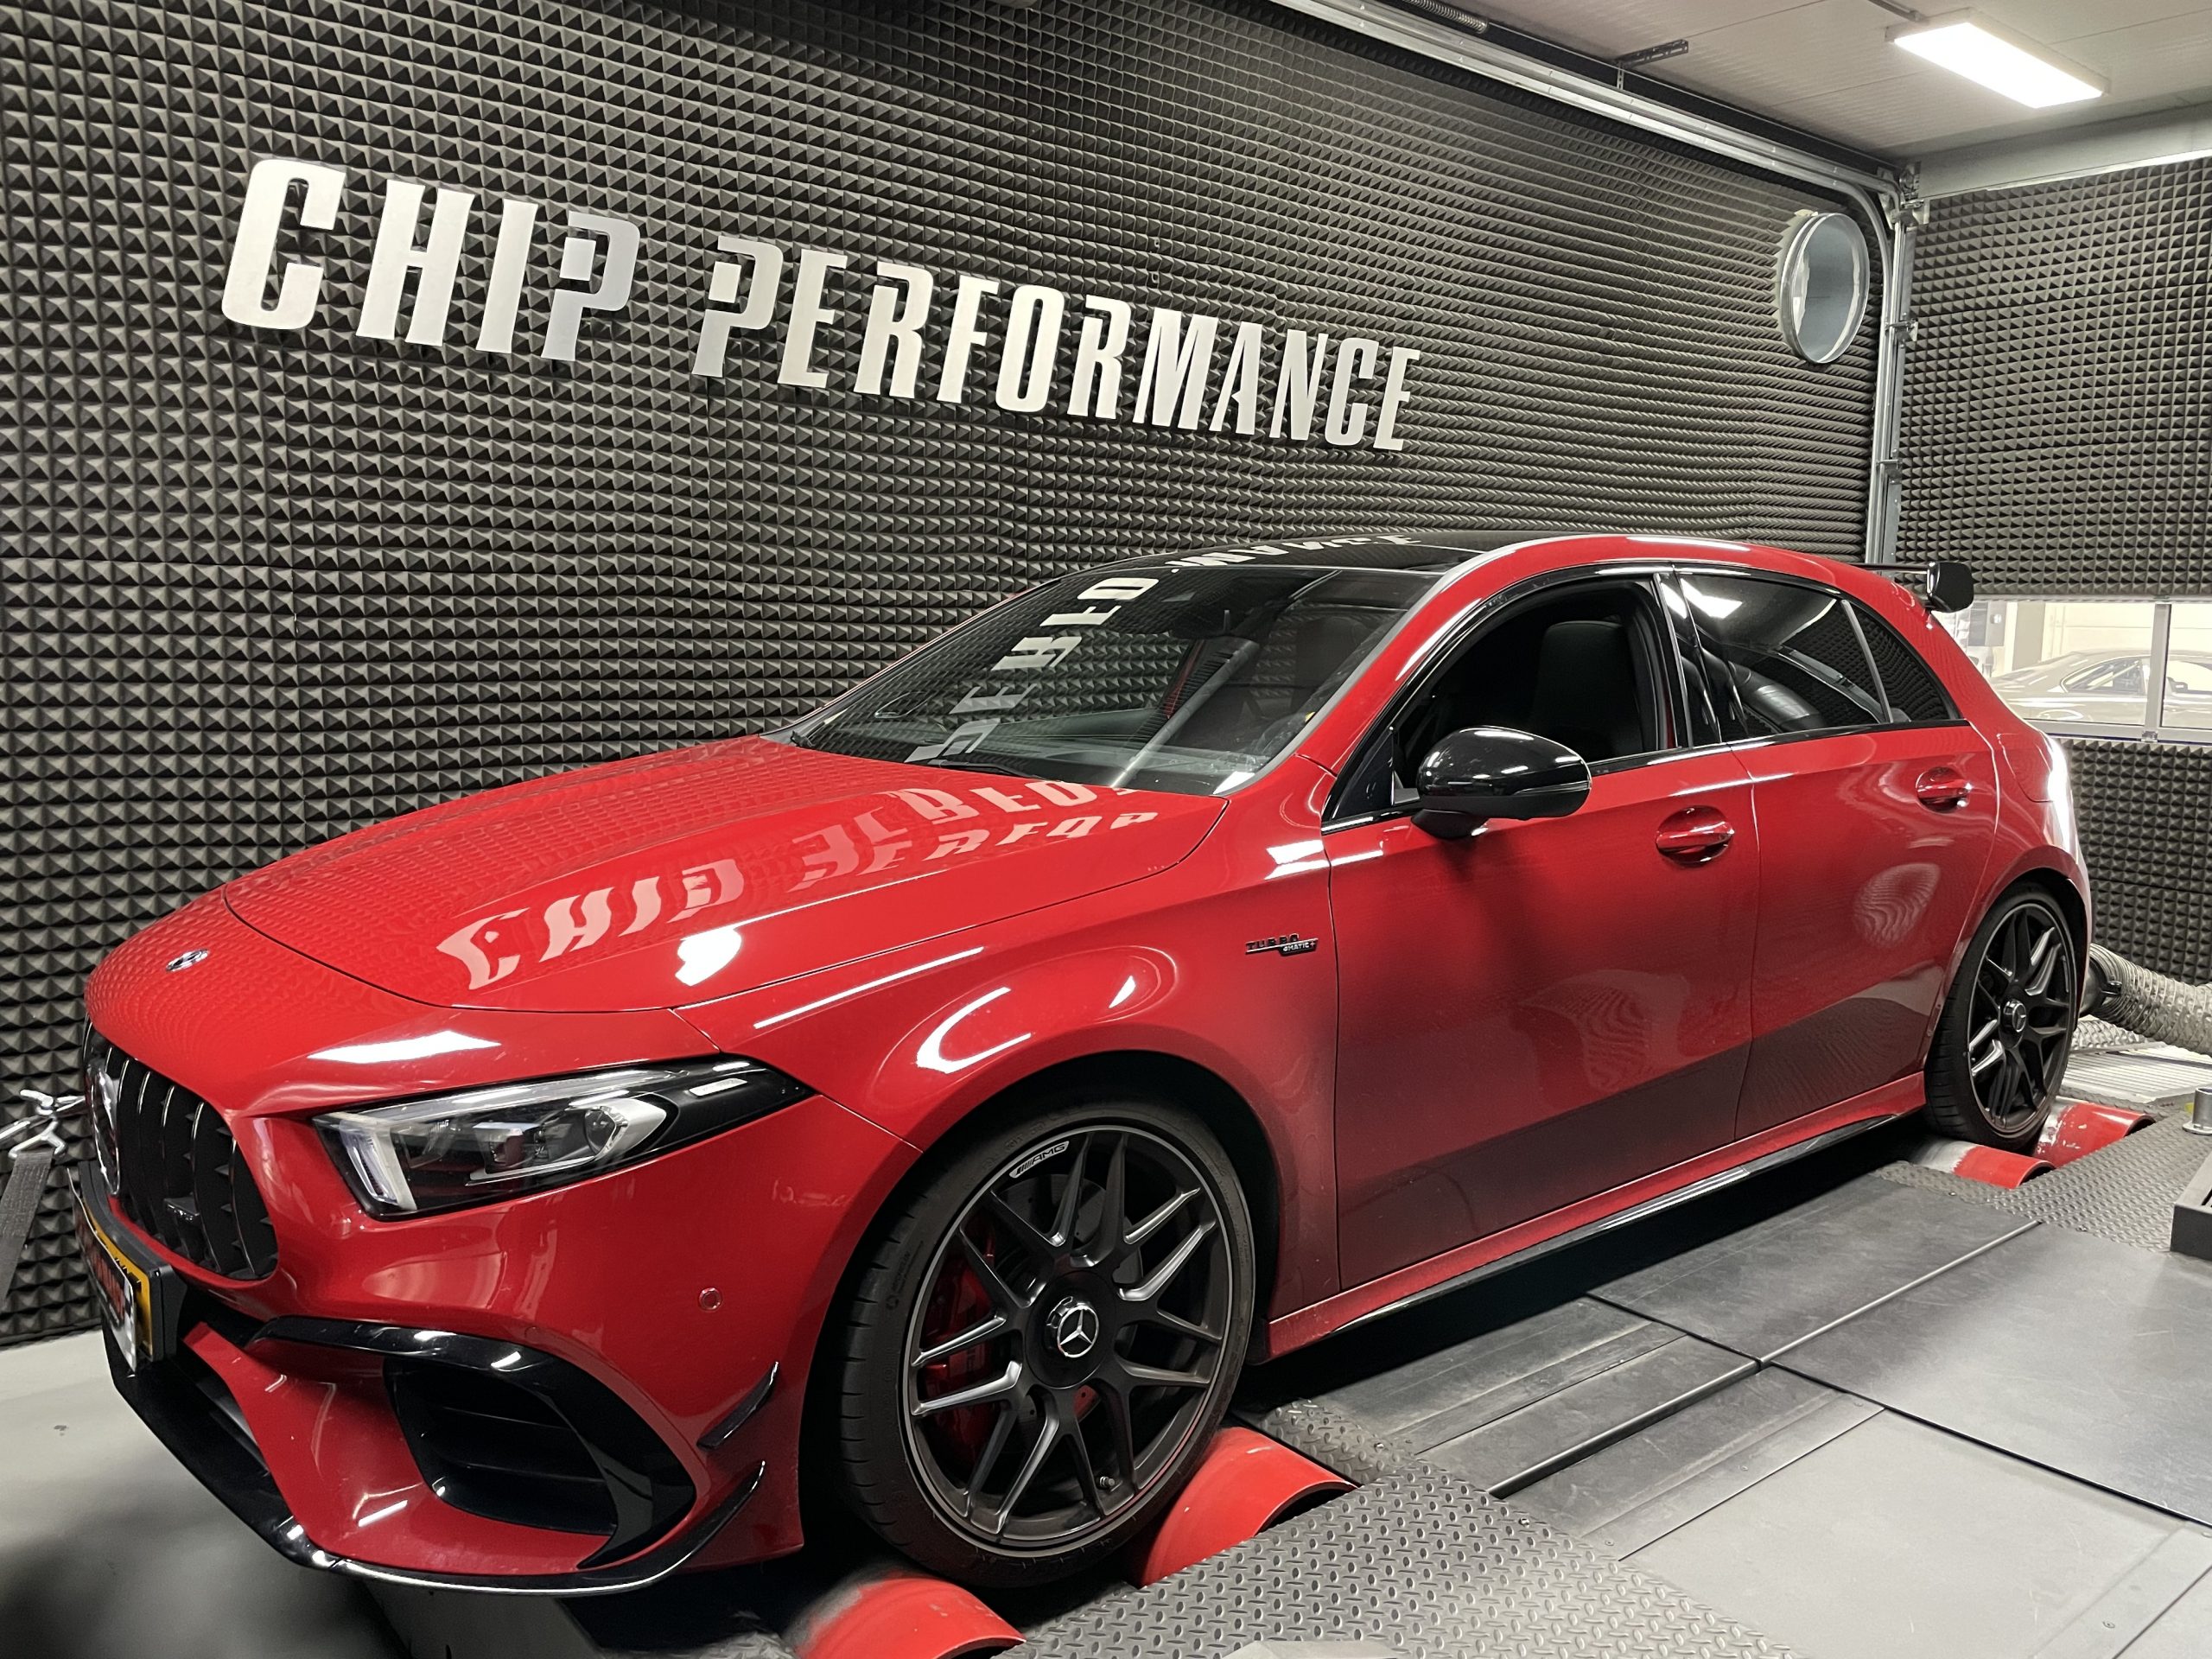 Chiptuning - Auto tuning op maat - ChipPerformance